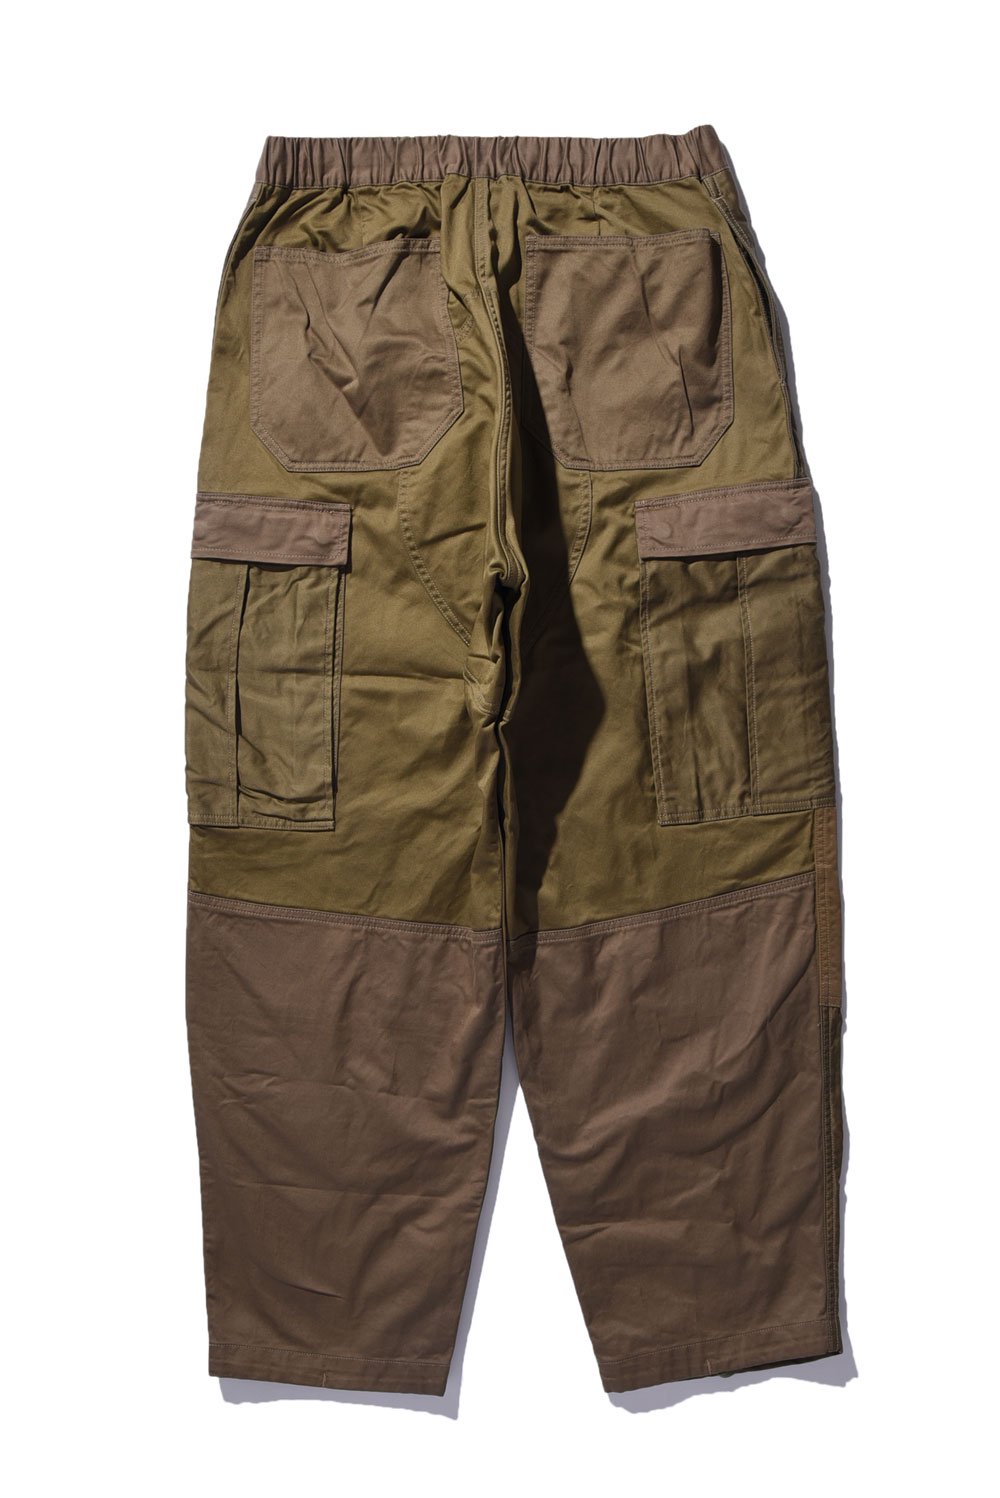 MODUCT(モダクト) カーゴパンツ MONKEY BUTT CARGO PANTS MODUCT MFG